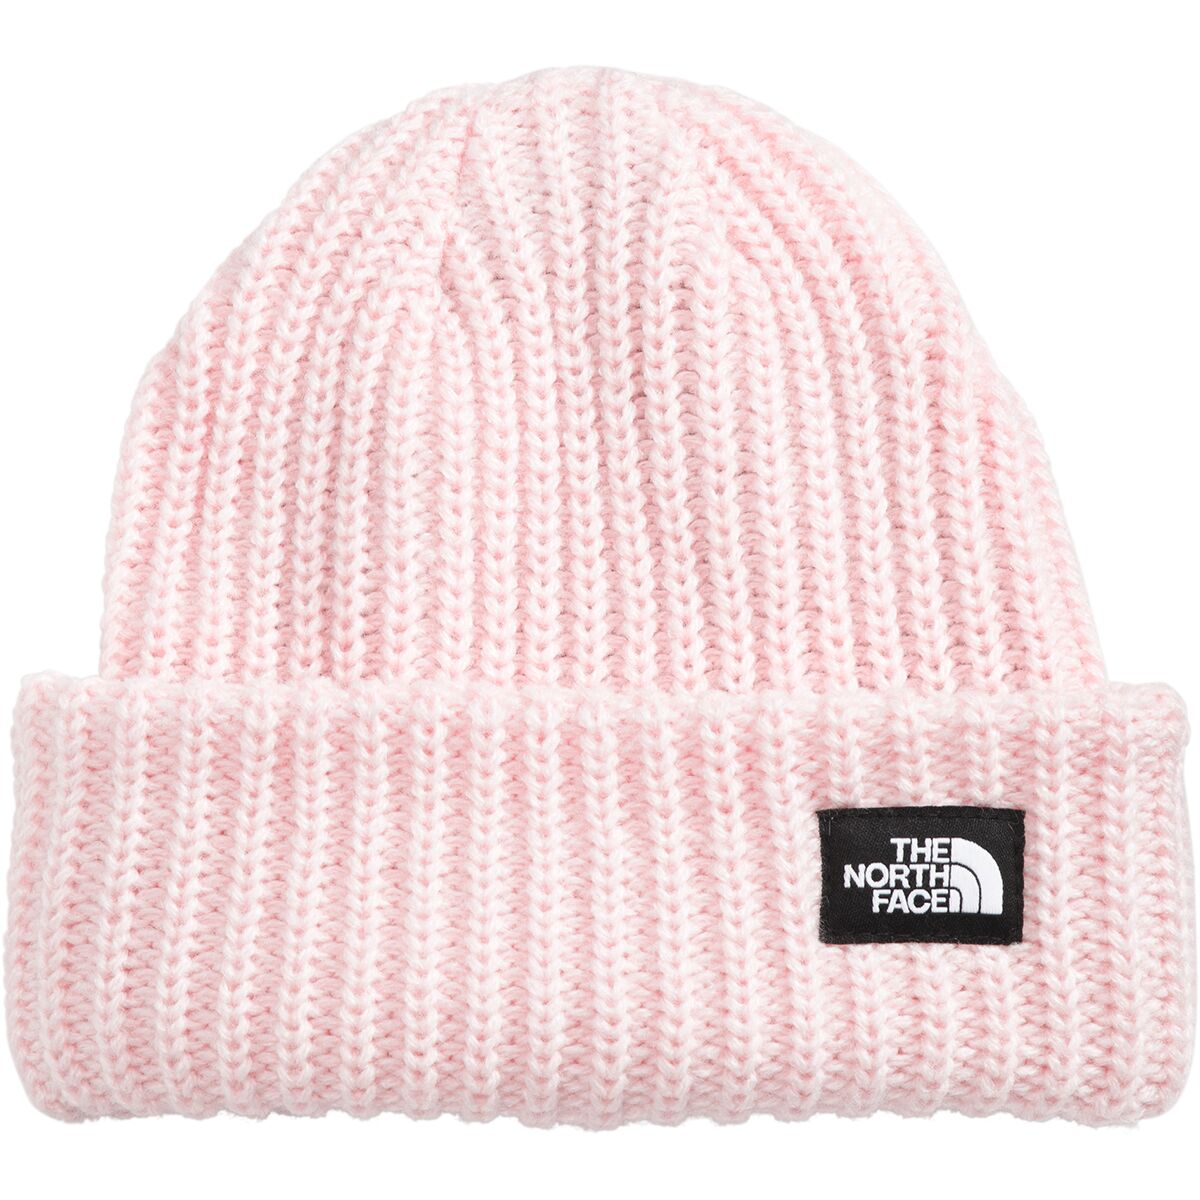 The North Face Salty Pup Beanie - Kids'